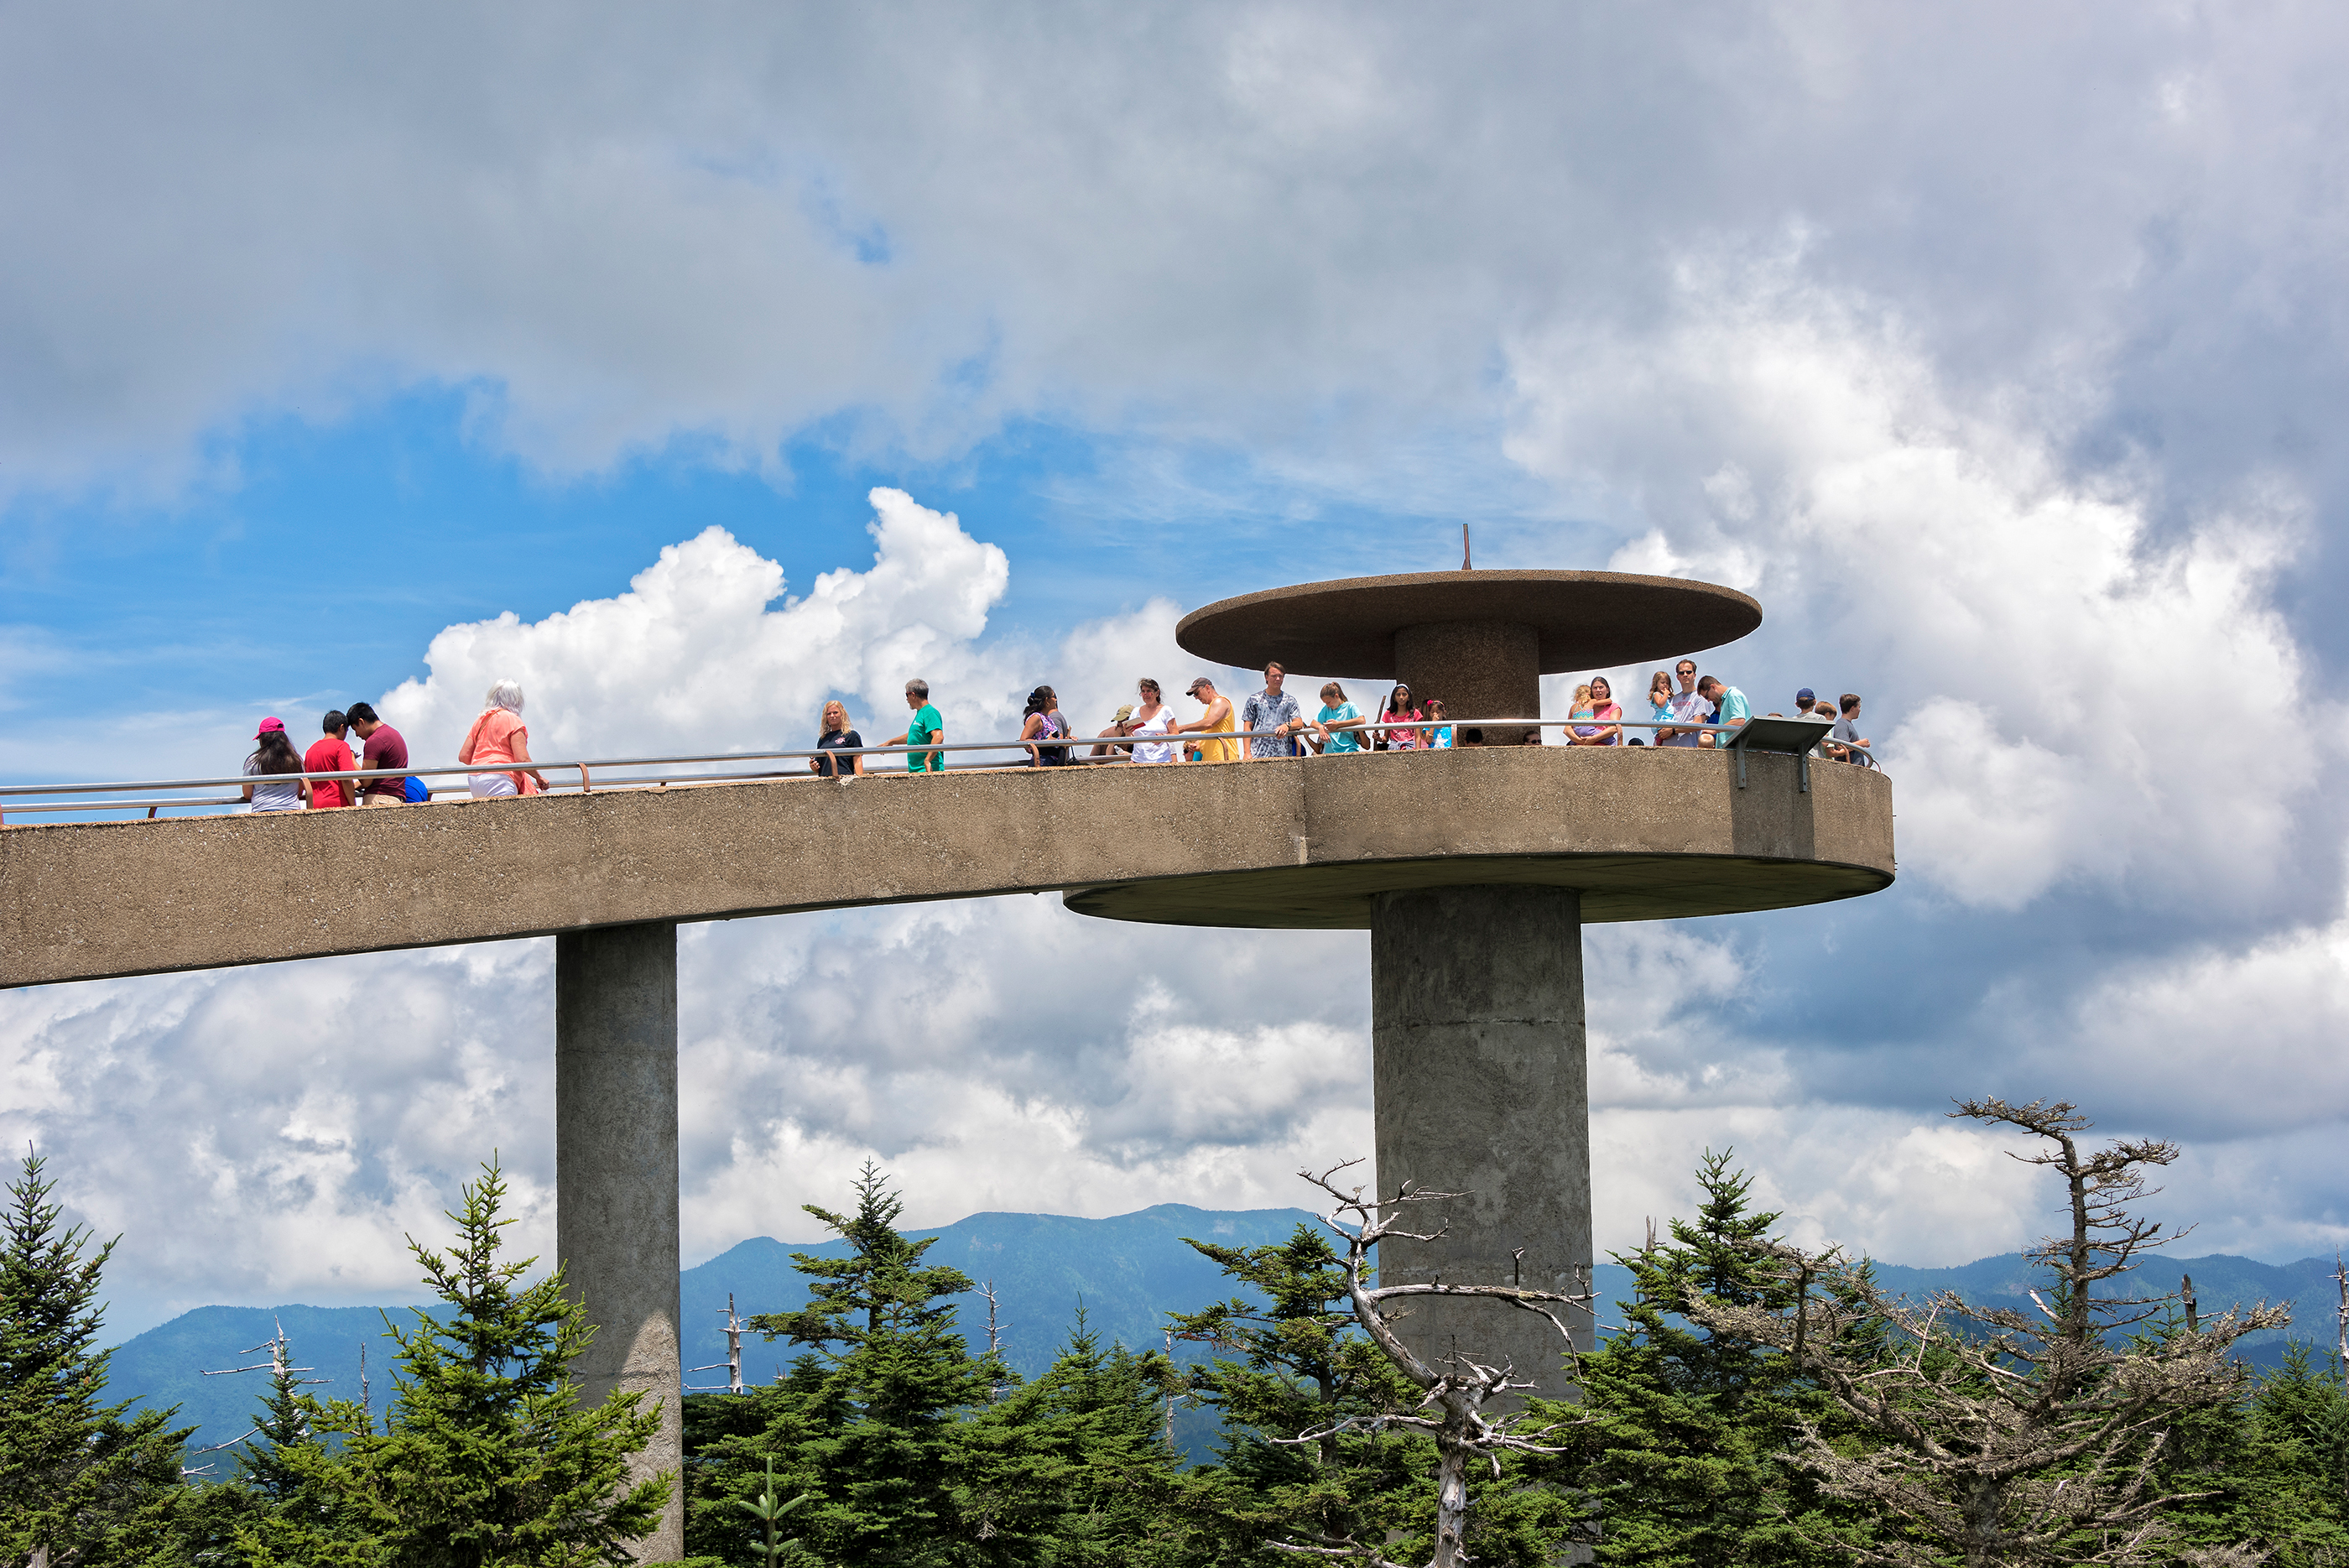 Clingmans Dome viewing point at the top of the Great Smoky Mountain National Park in Tennessee, Bryson City, July 14, 2016.